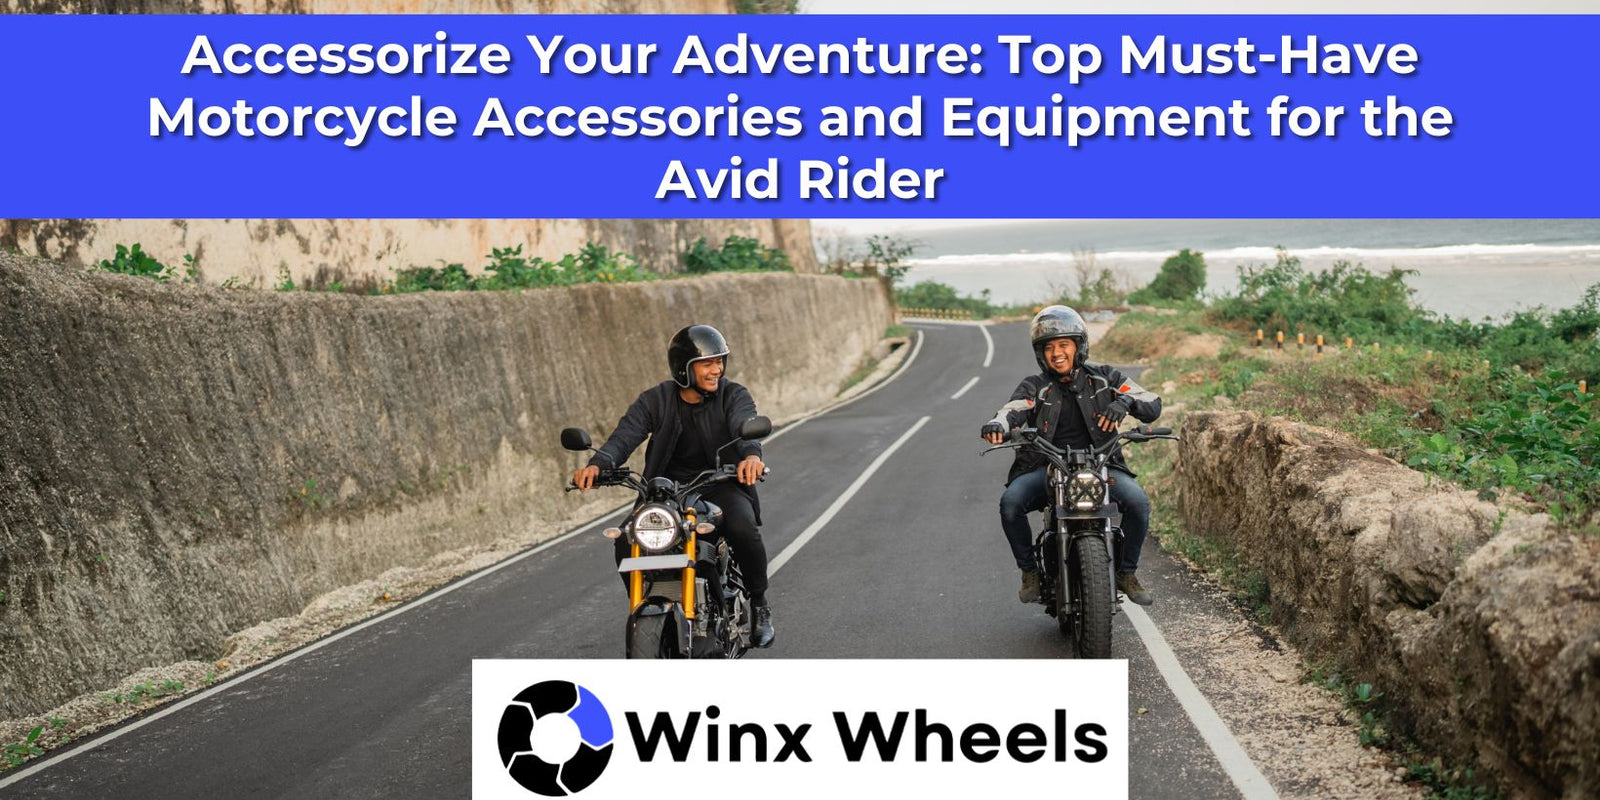 Accessorize Your Adventure: Top Must-Have Motorcycle Accessories and Equipment for the Avid Rider